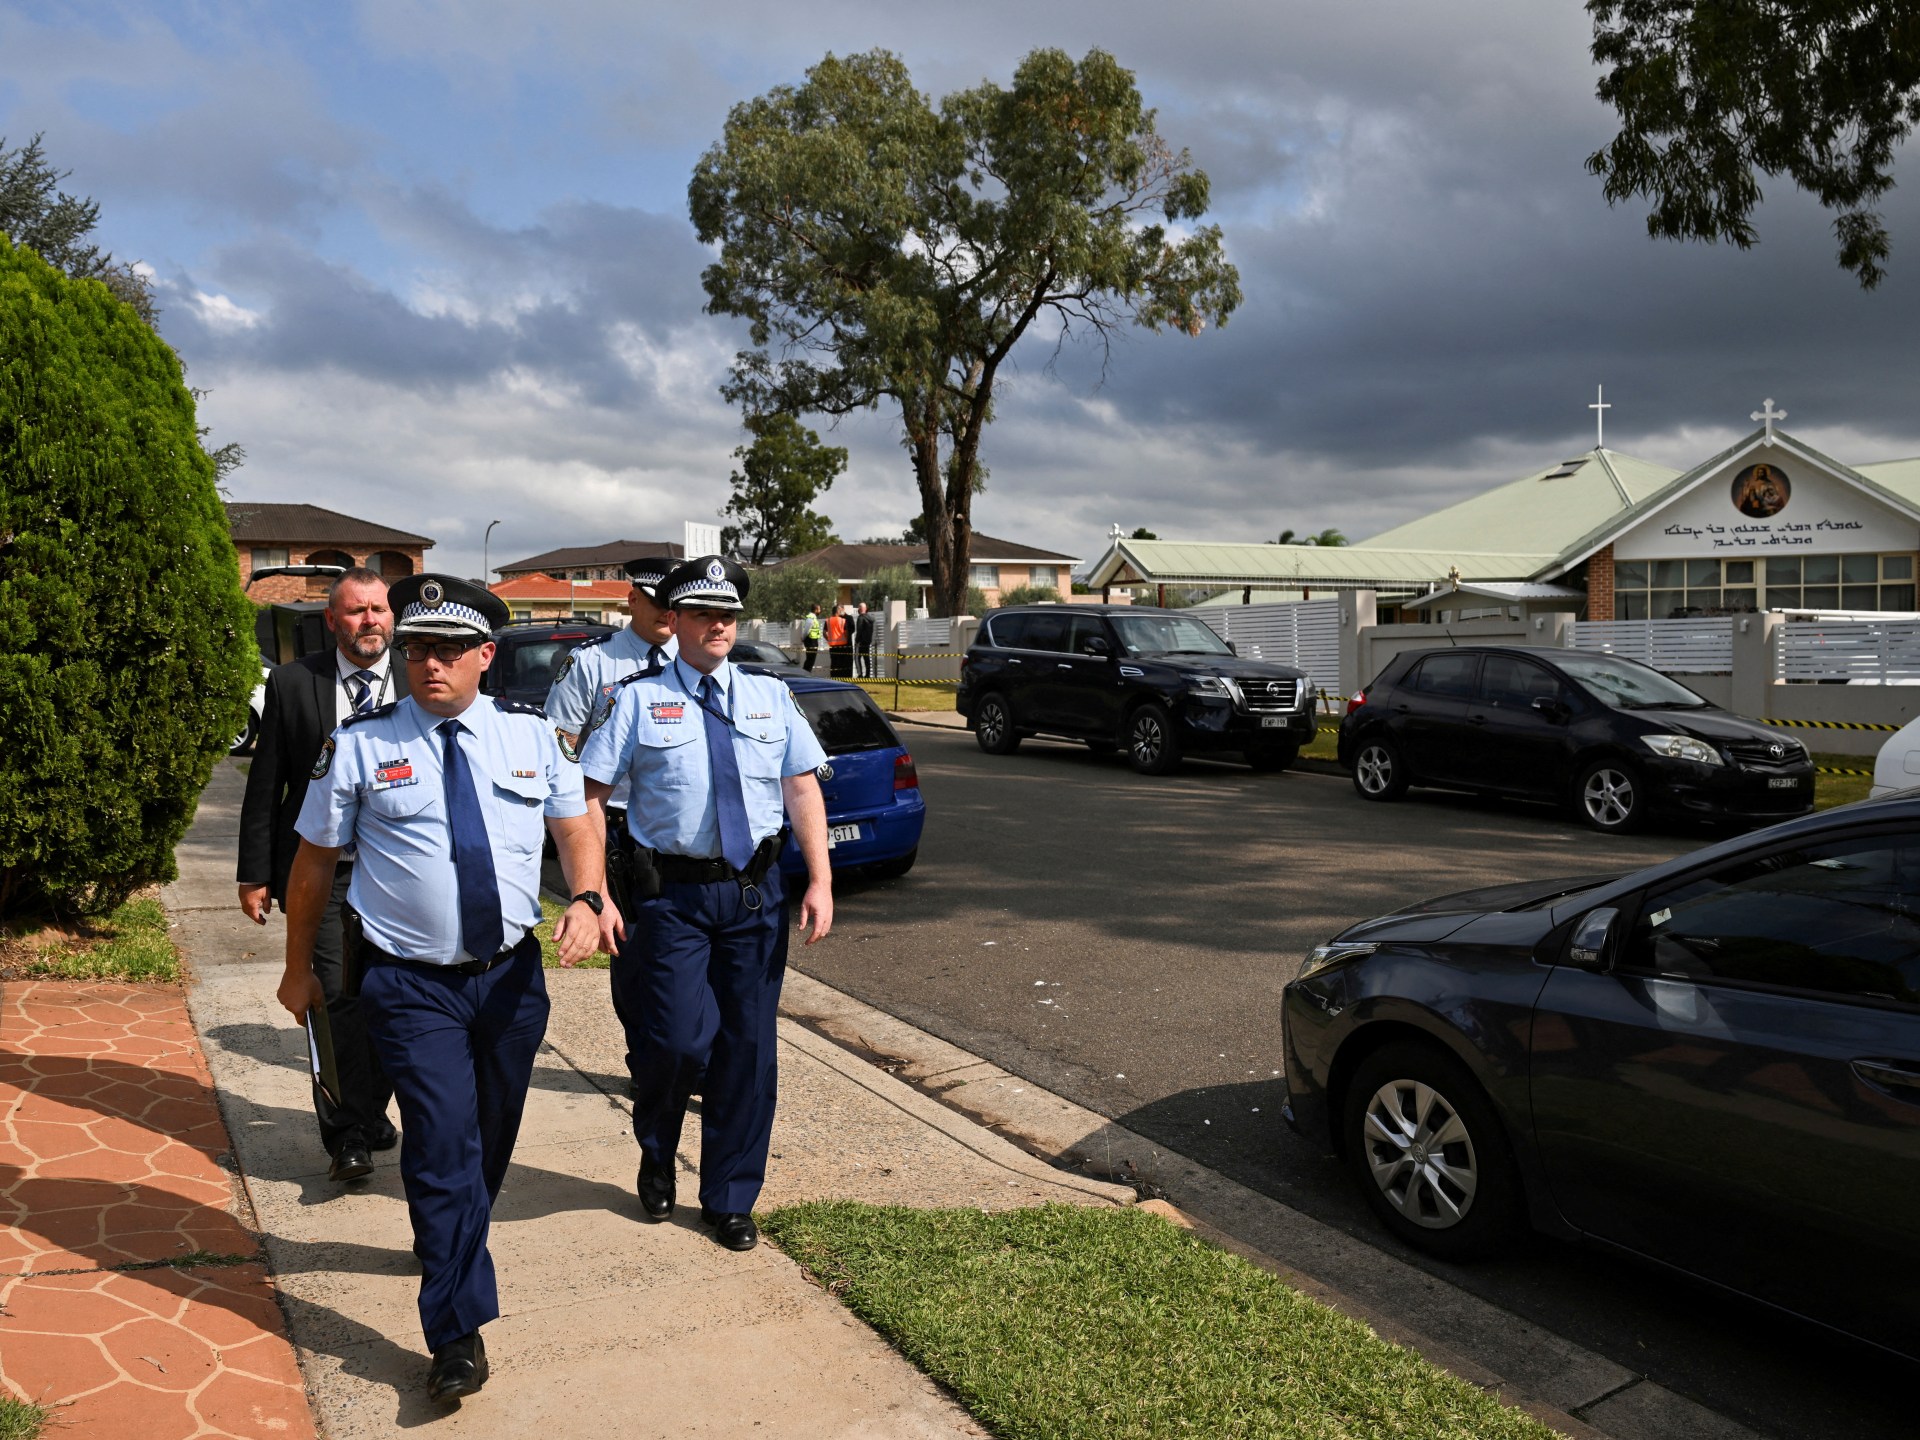 ‘Radicalised’ 16-year-old shot dead by Australia police after stabbing man